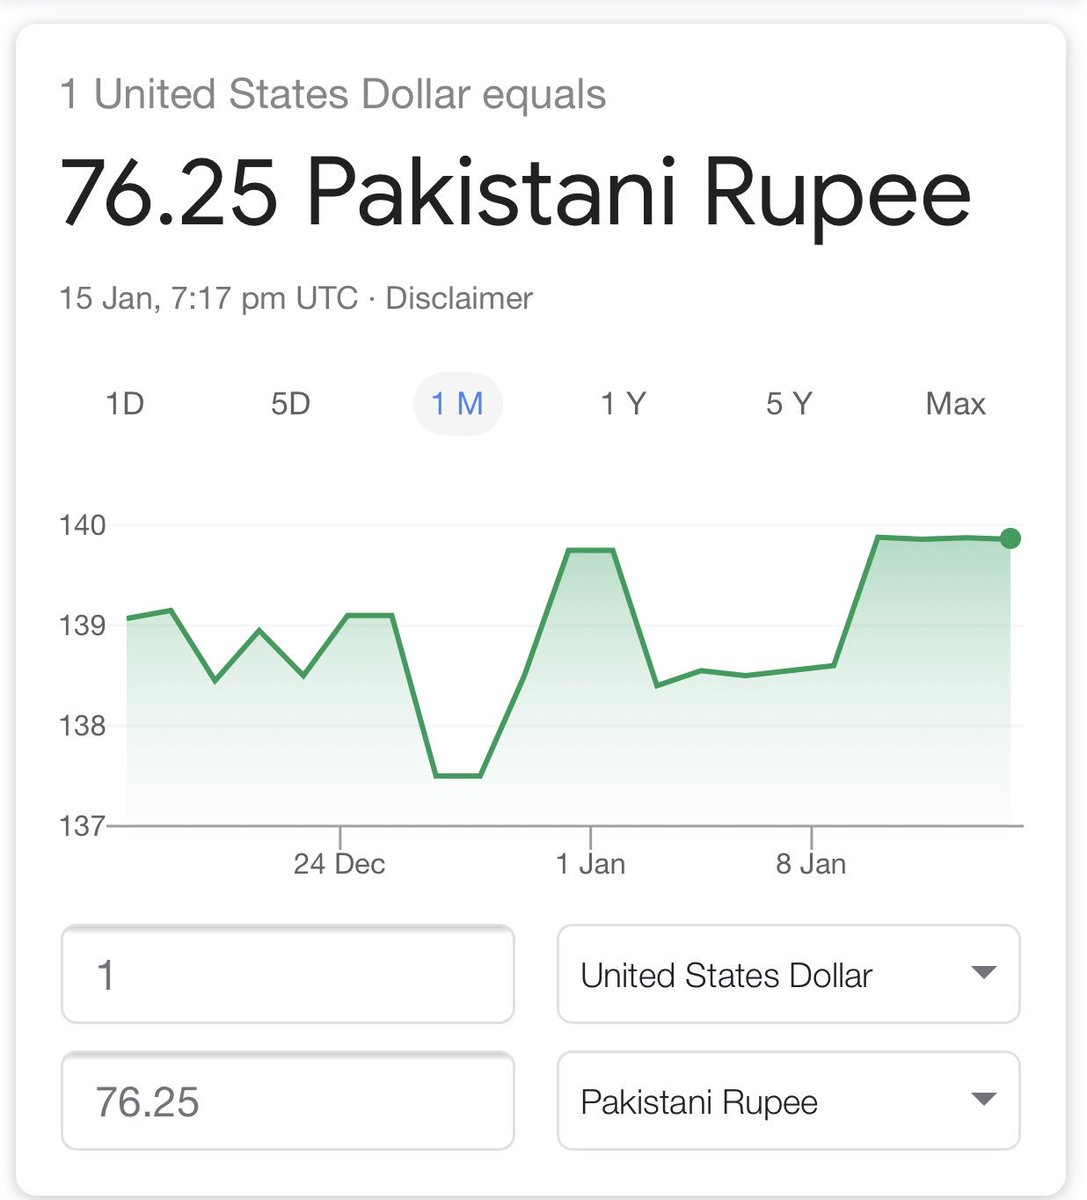 Usd to pkr